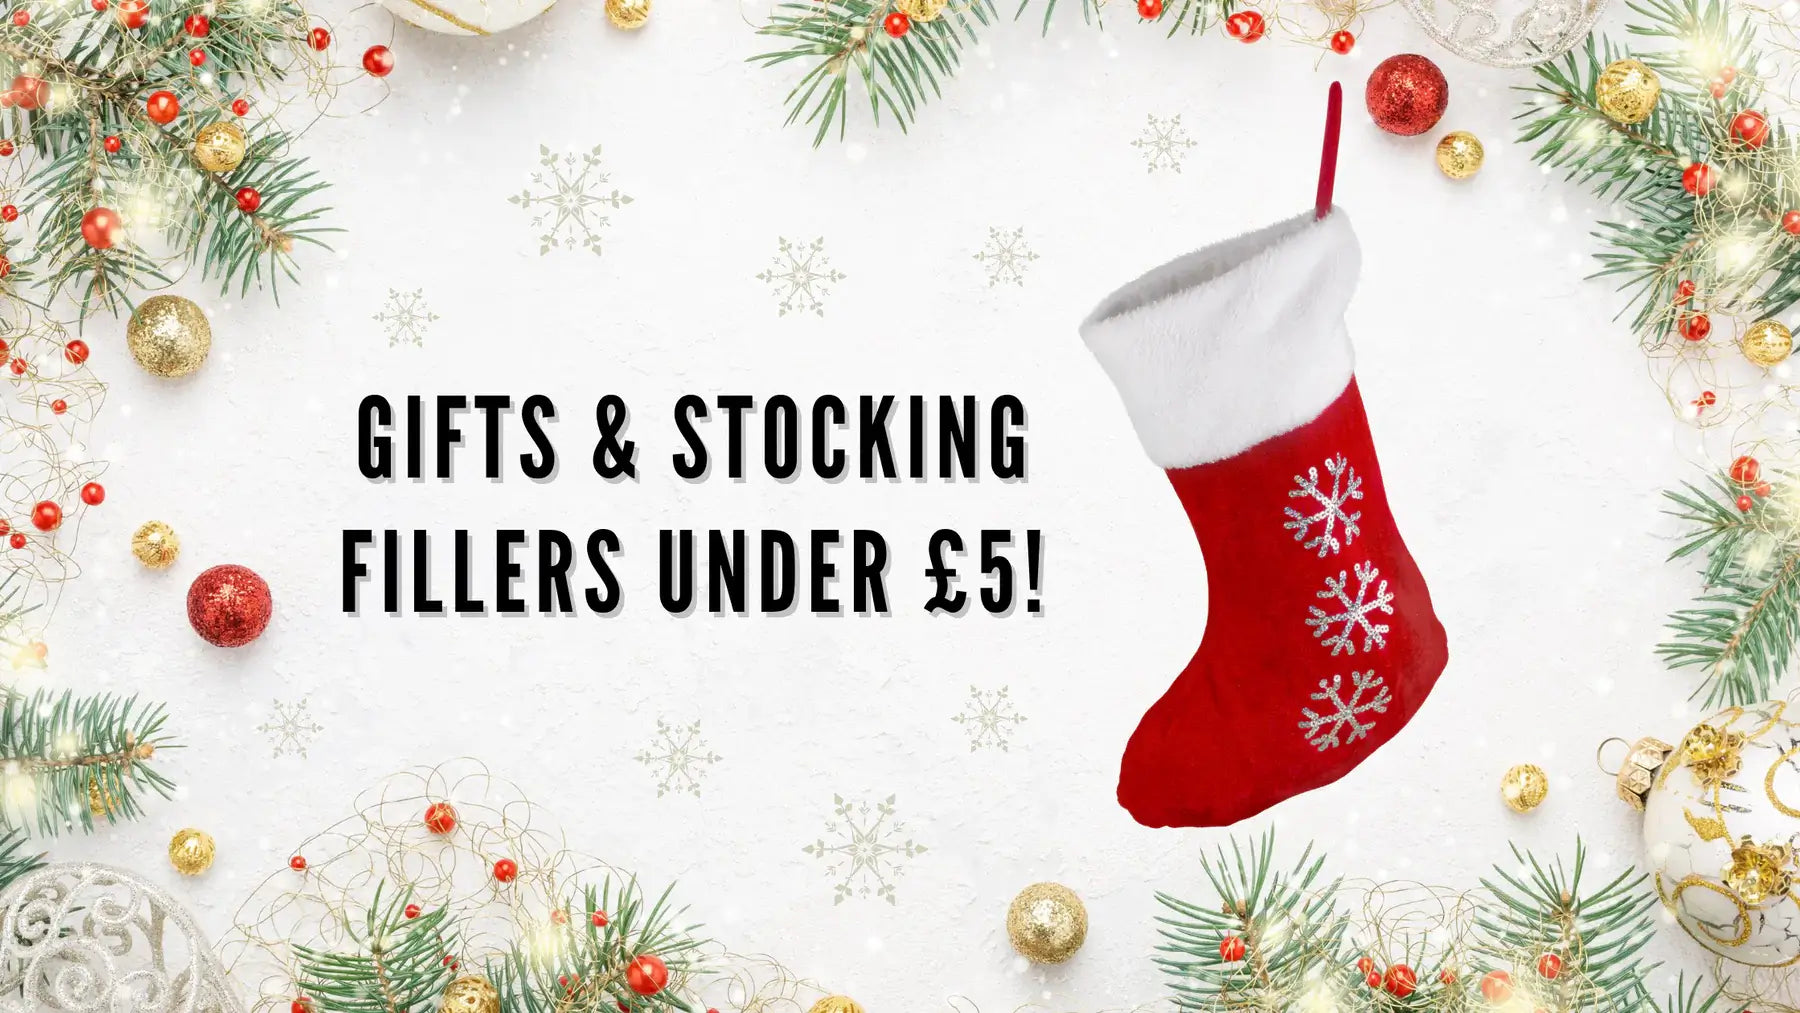 Stocking fillers and gifts